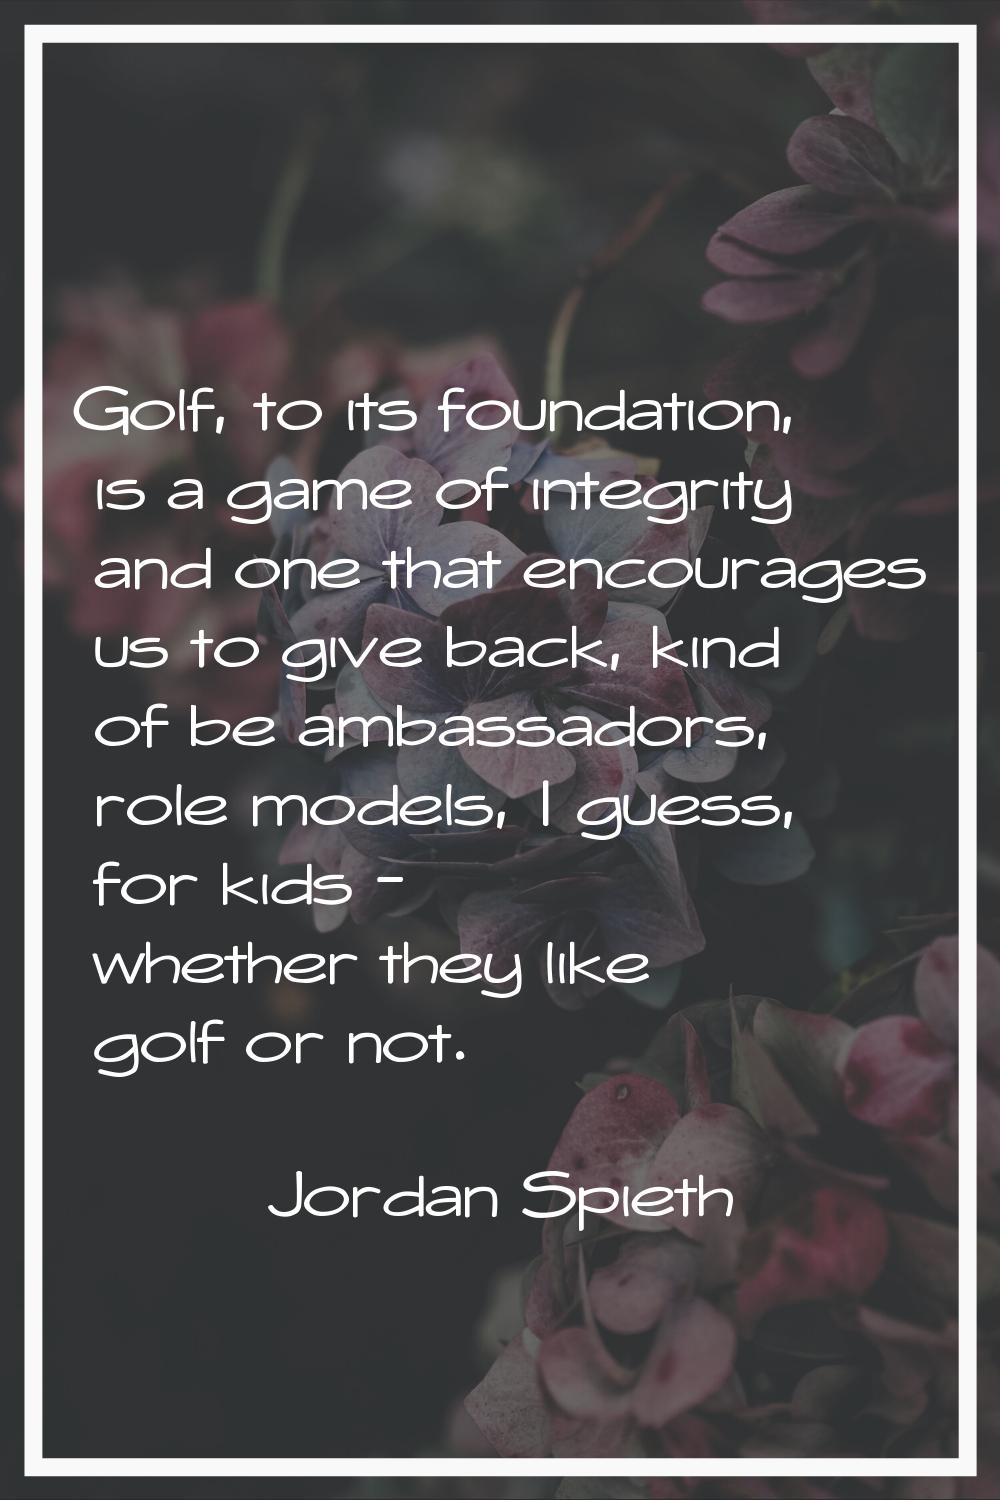 Golf, to its foundation, is a game of integrity and one that encourages us to give back, kind of be